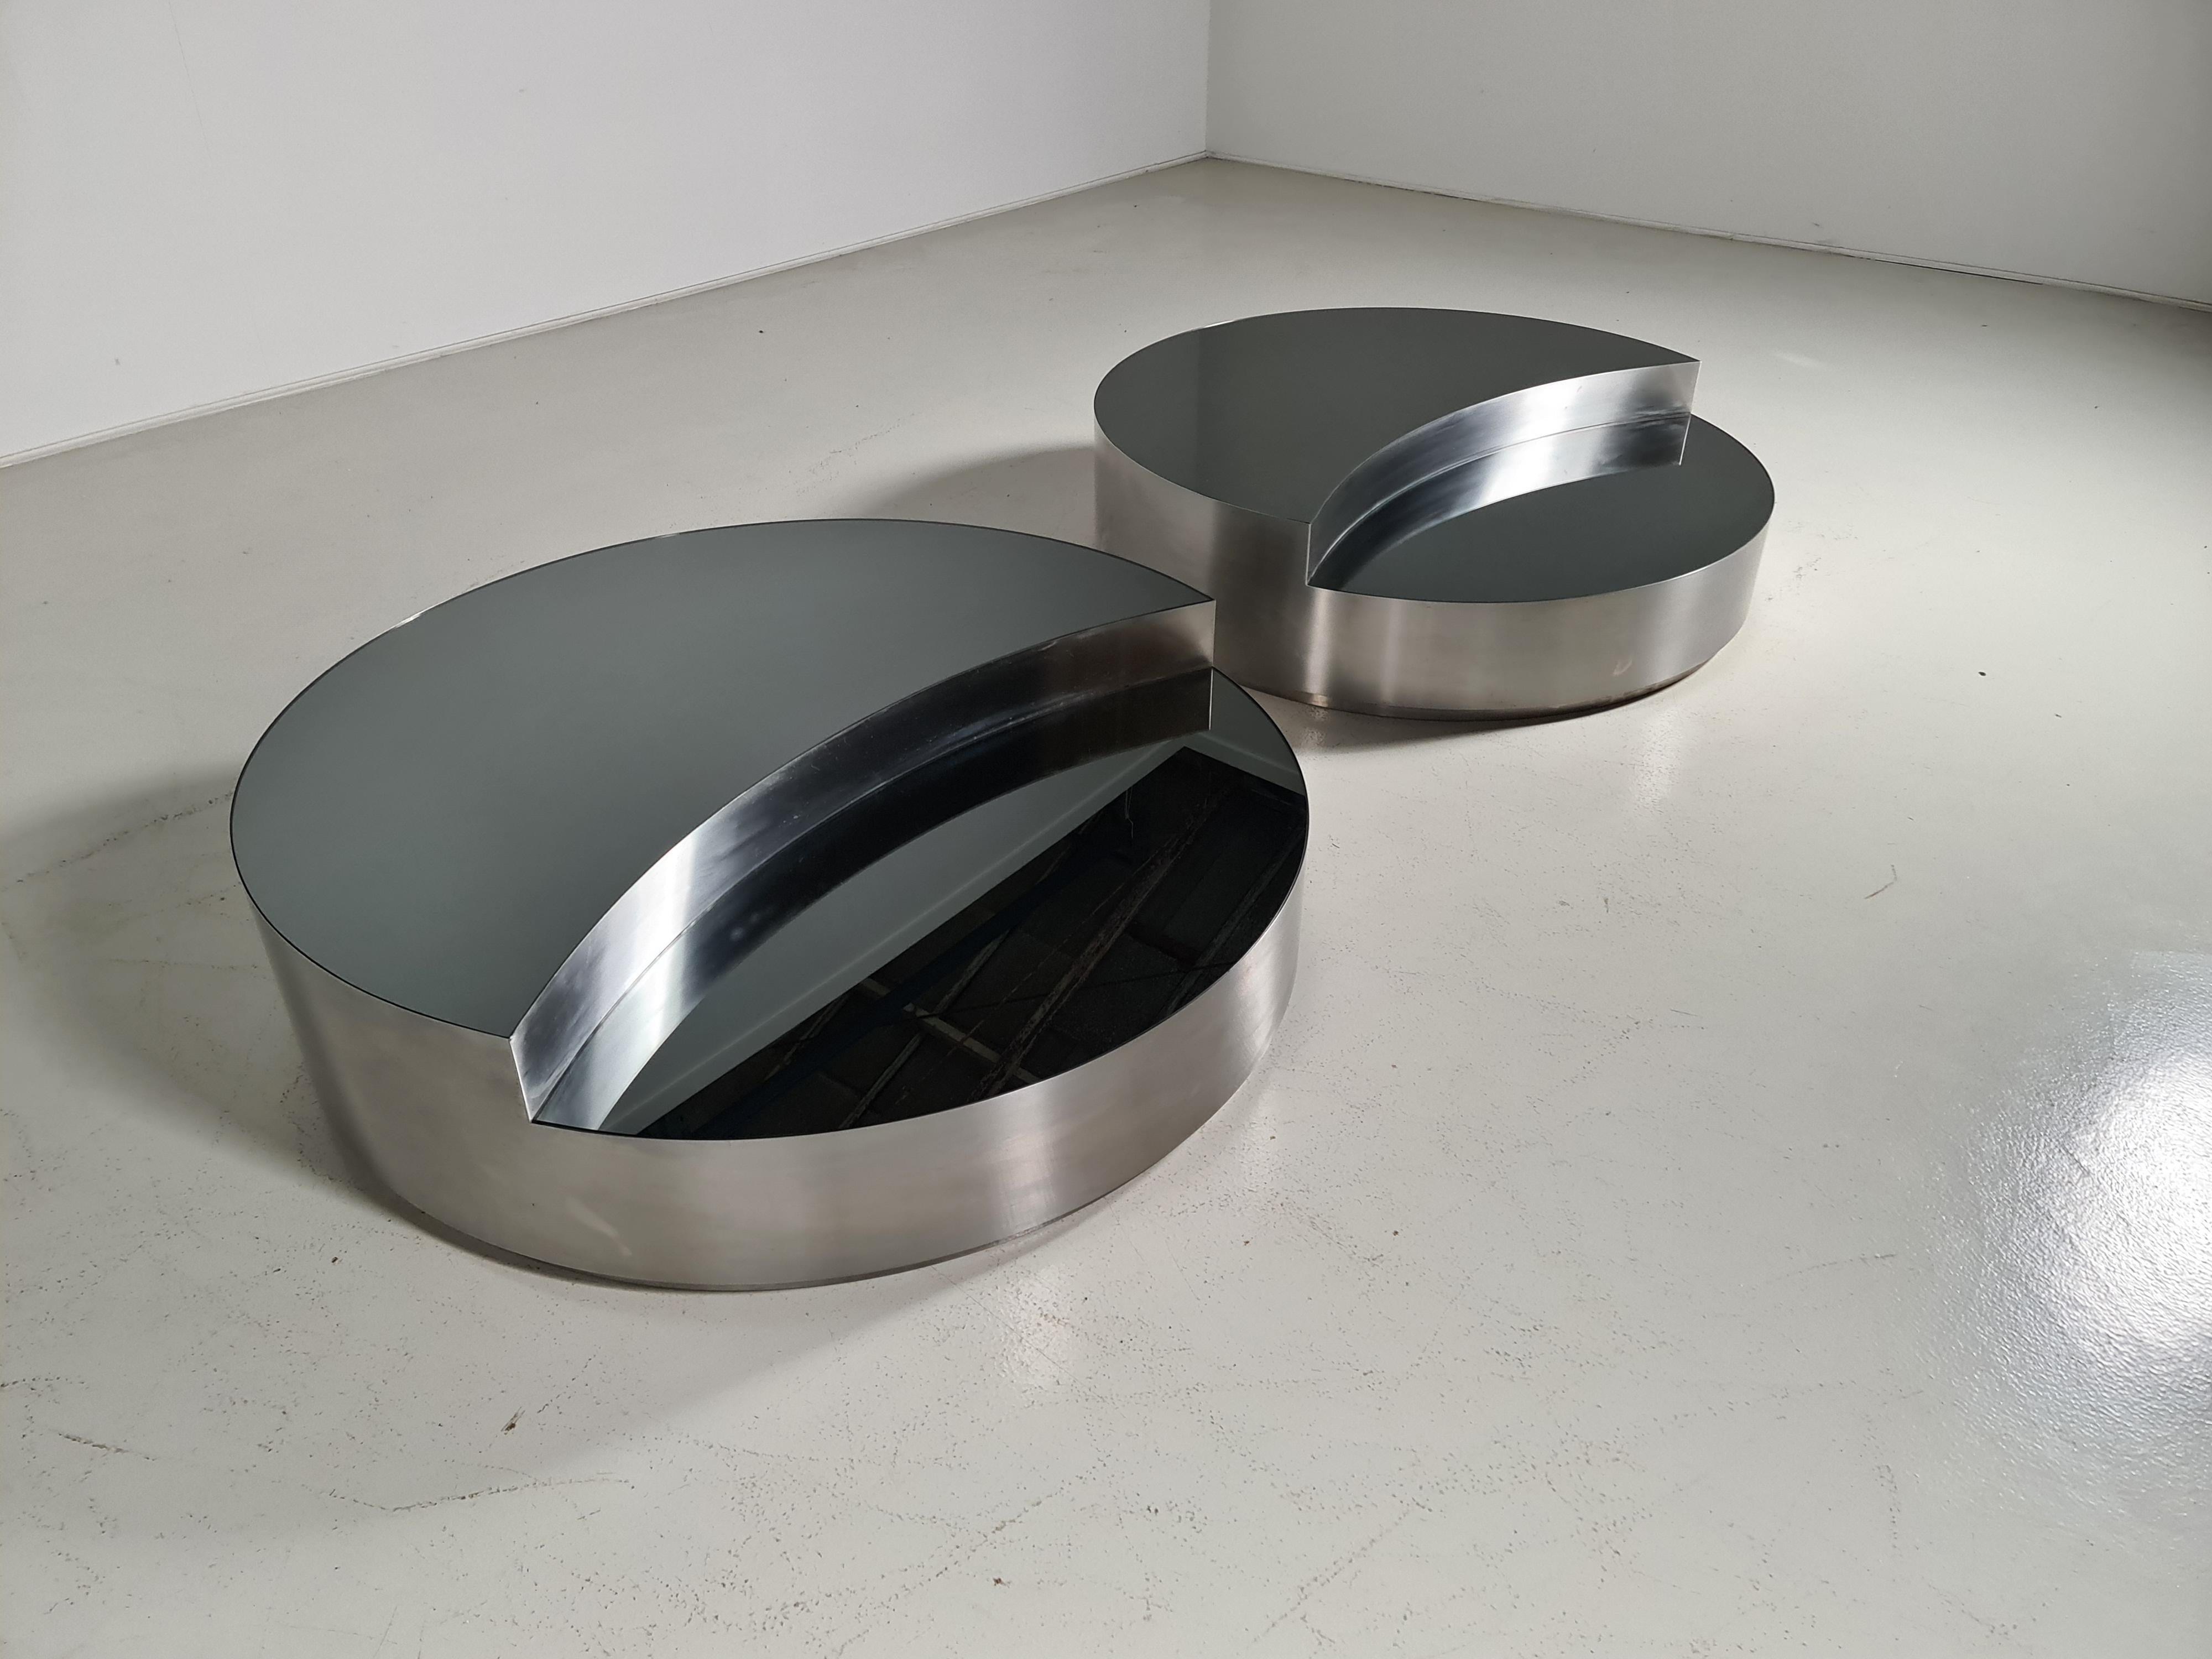 Mid-Century Modern Stainless Steel Coffee Table with Smoked Mirrored Top from the 1970s